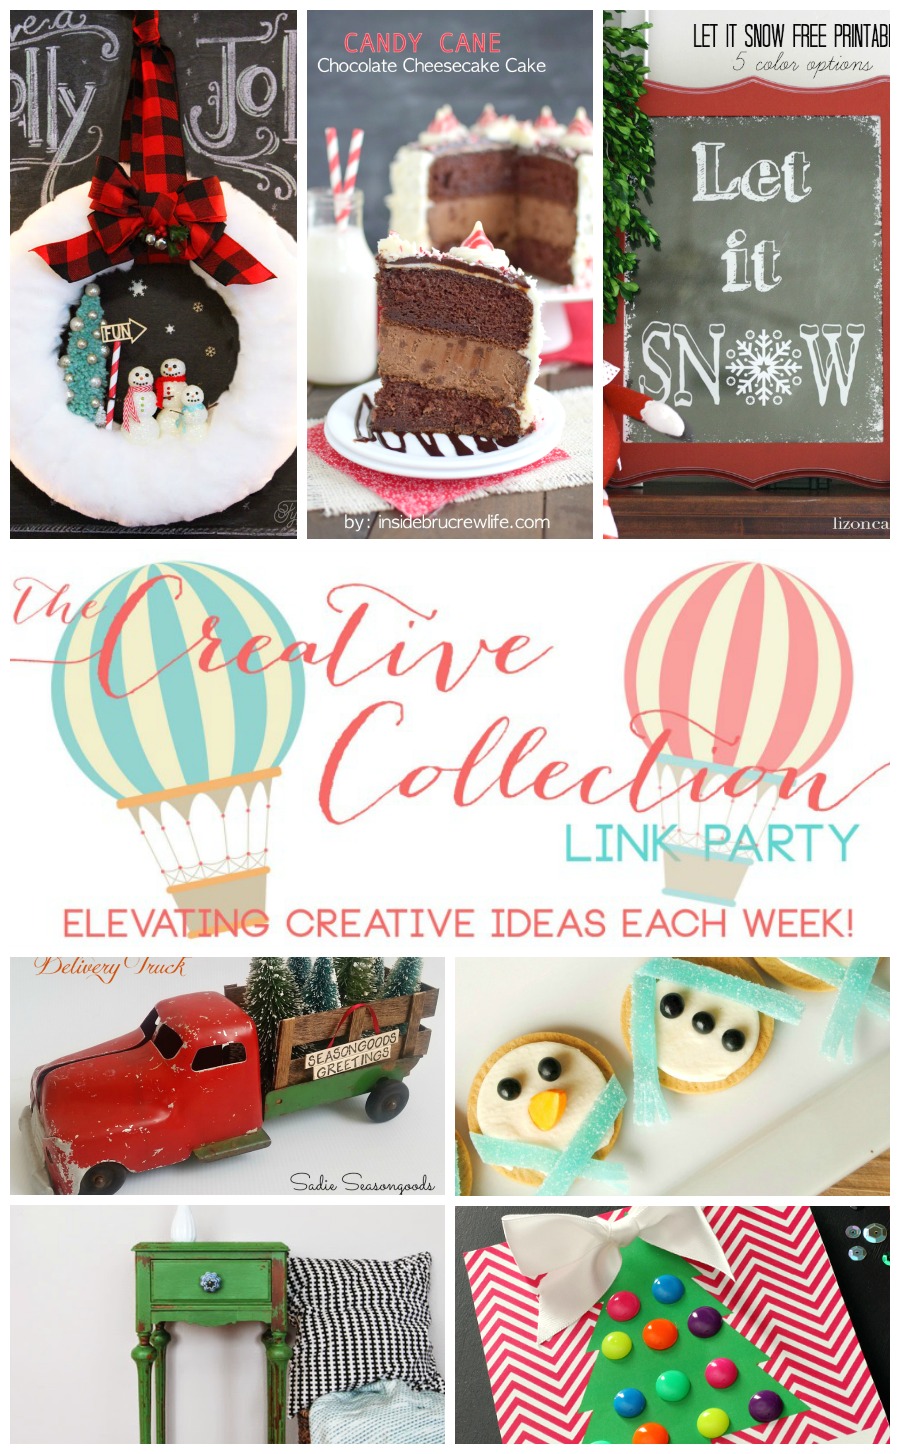 The Creative Collection Link Party